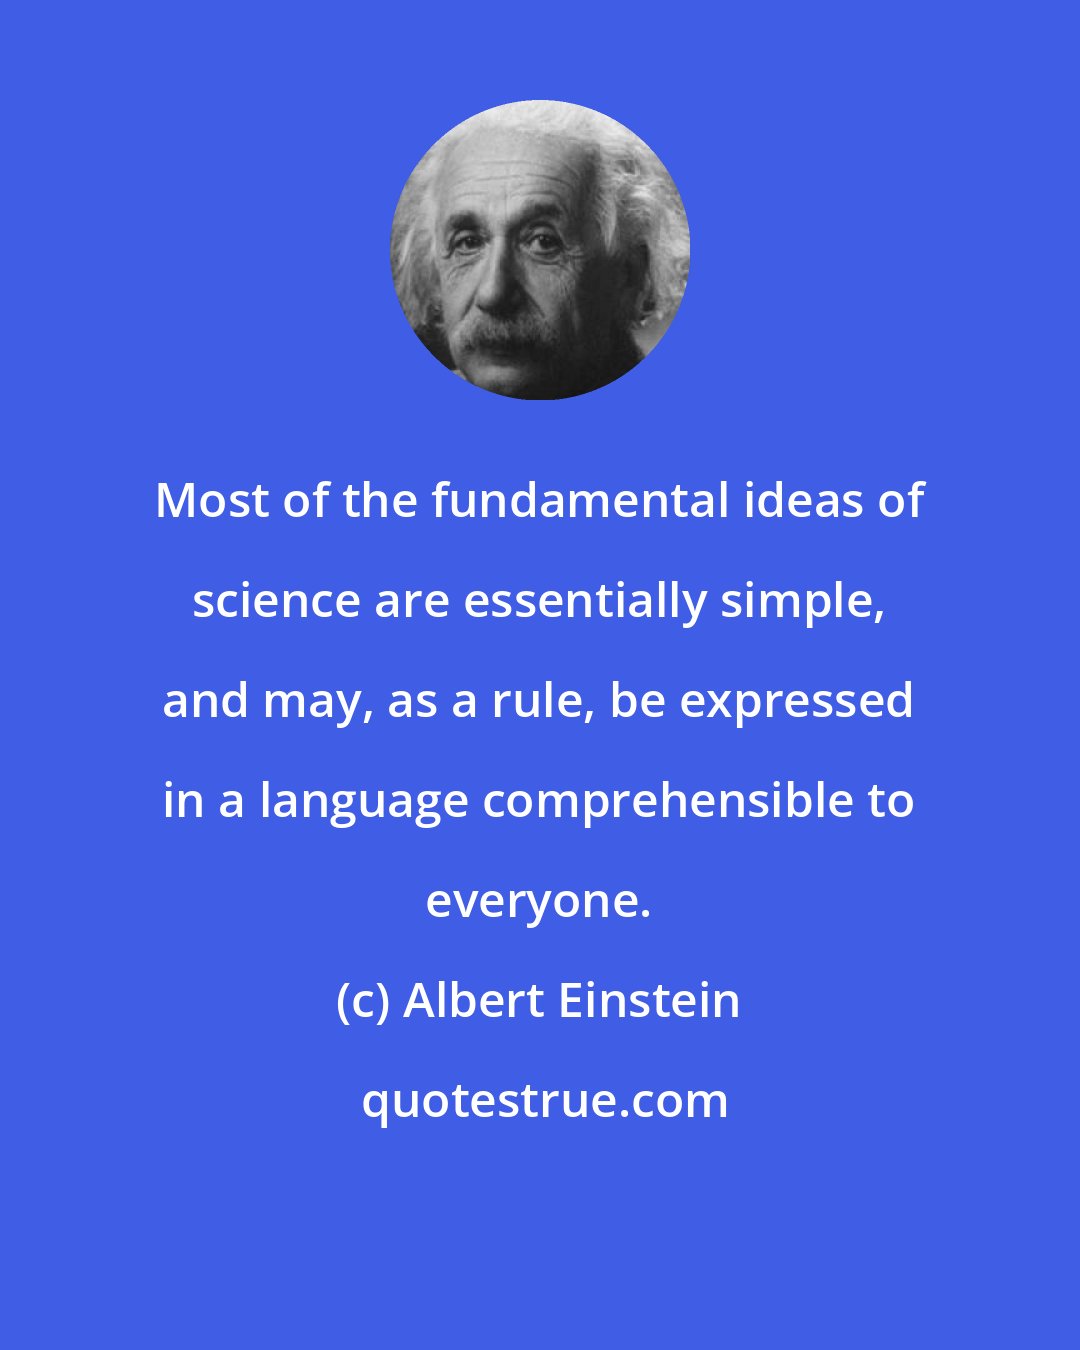 Albert Einstein: Most of the fundamental ideas of science are essentially simple, and may, as a rule, be expressed in a language comprehensible to everyone.